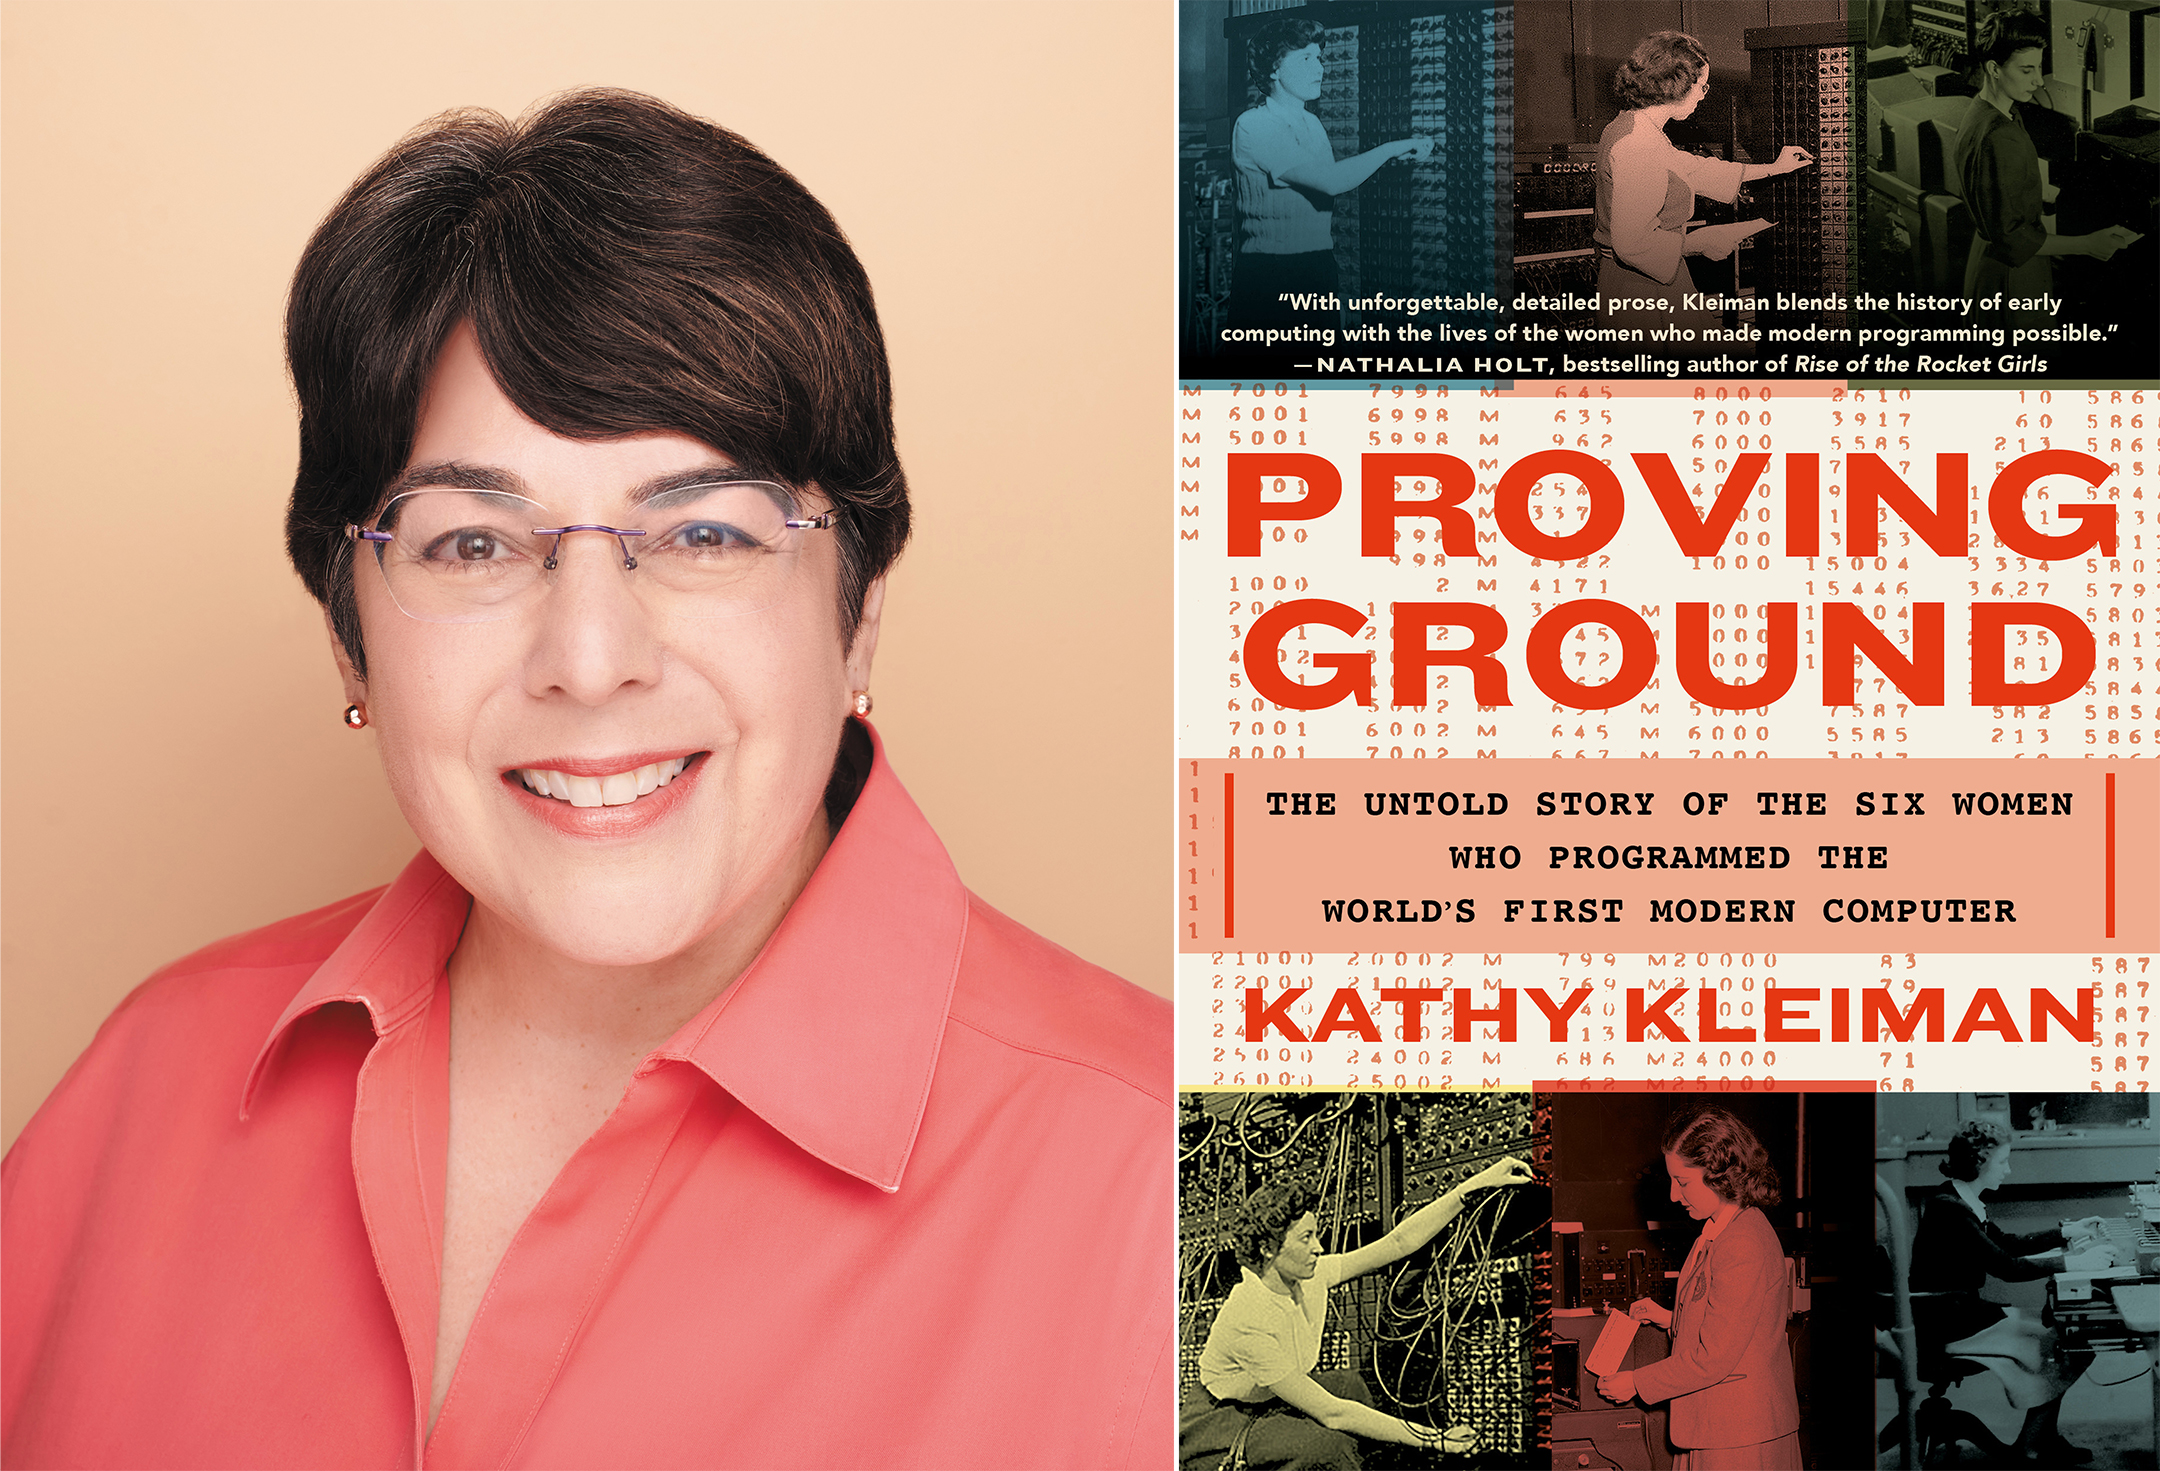 Headshot photo of Kathy Kleiman at left, cover of the book Proving Ground at right